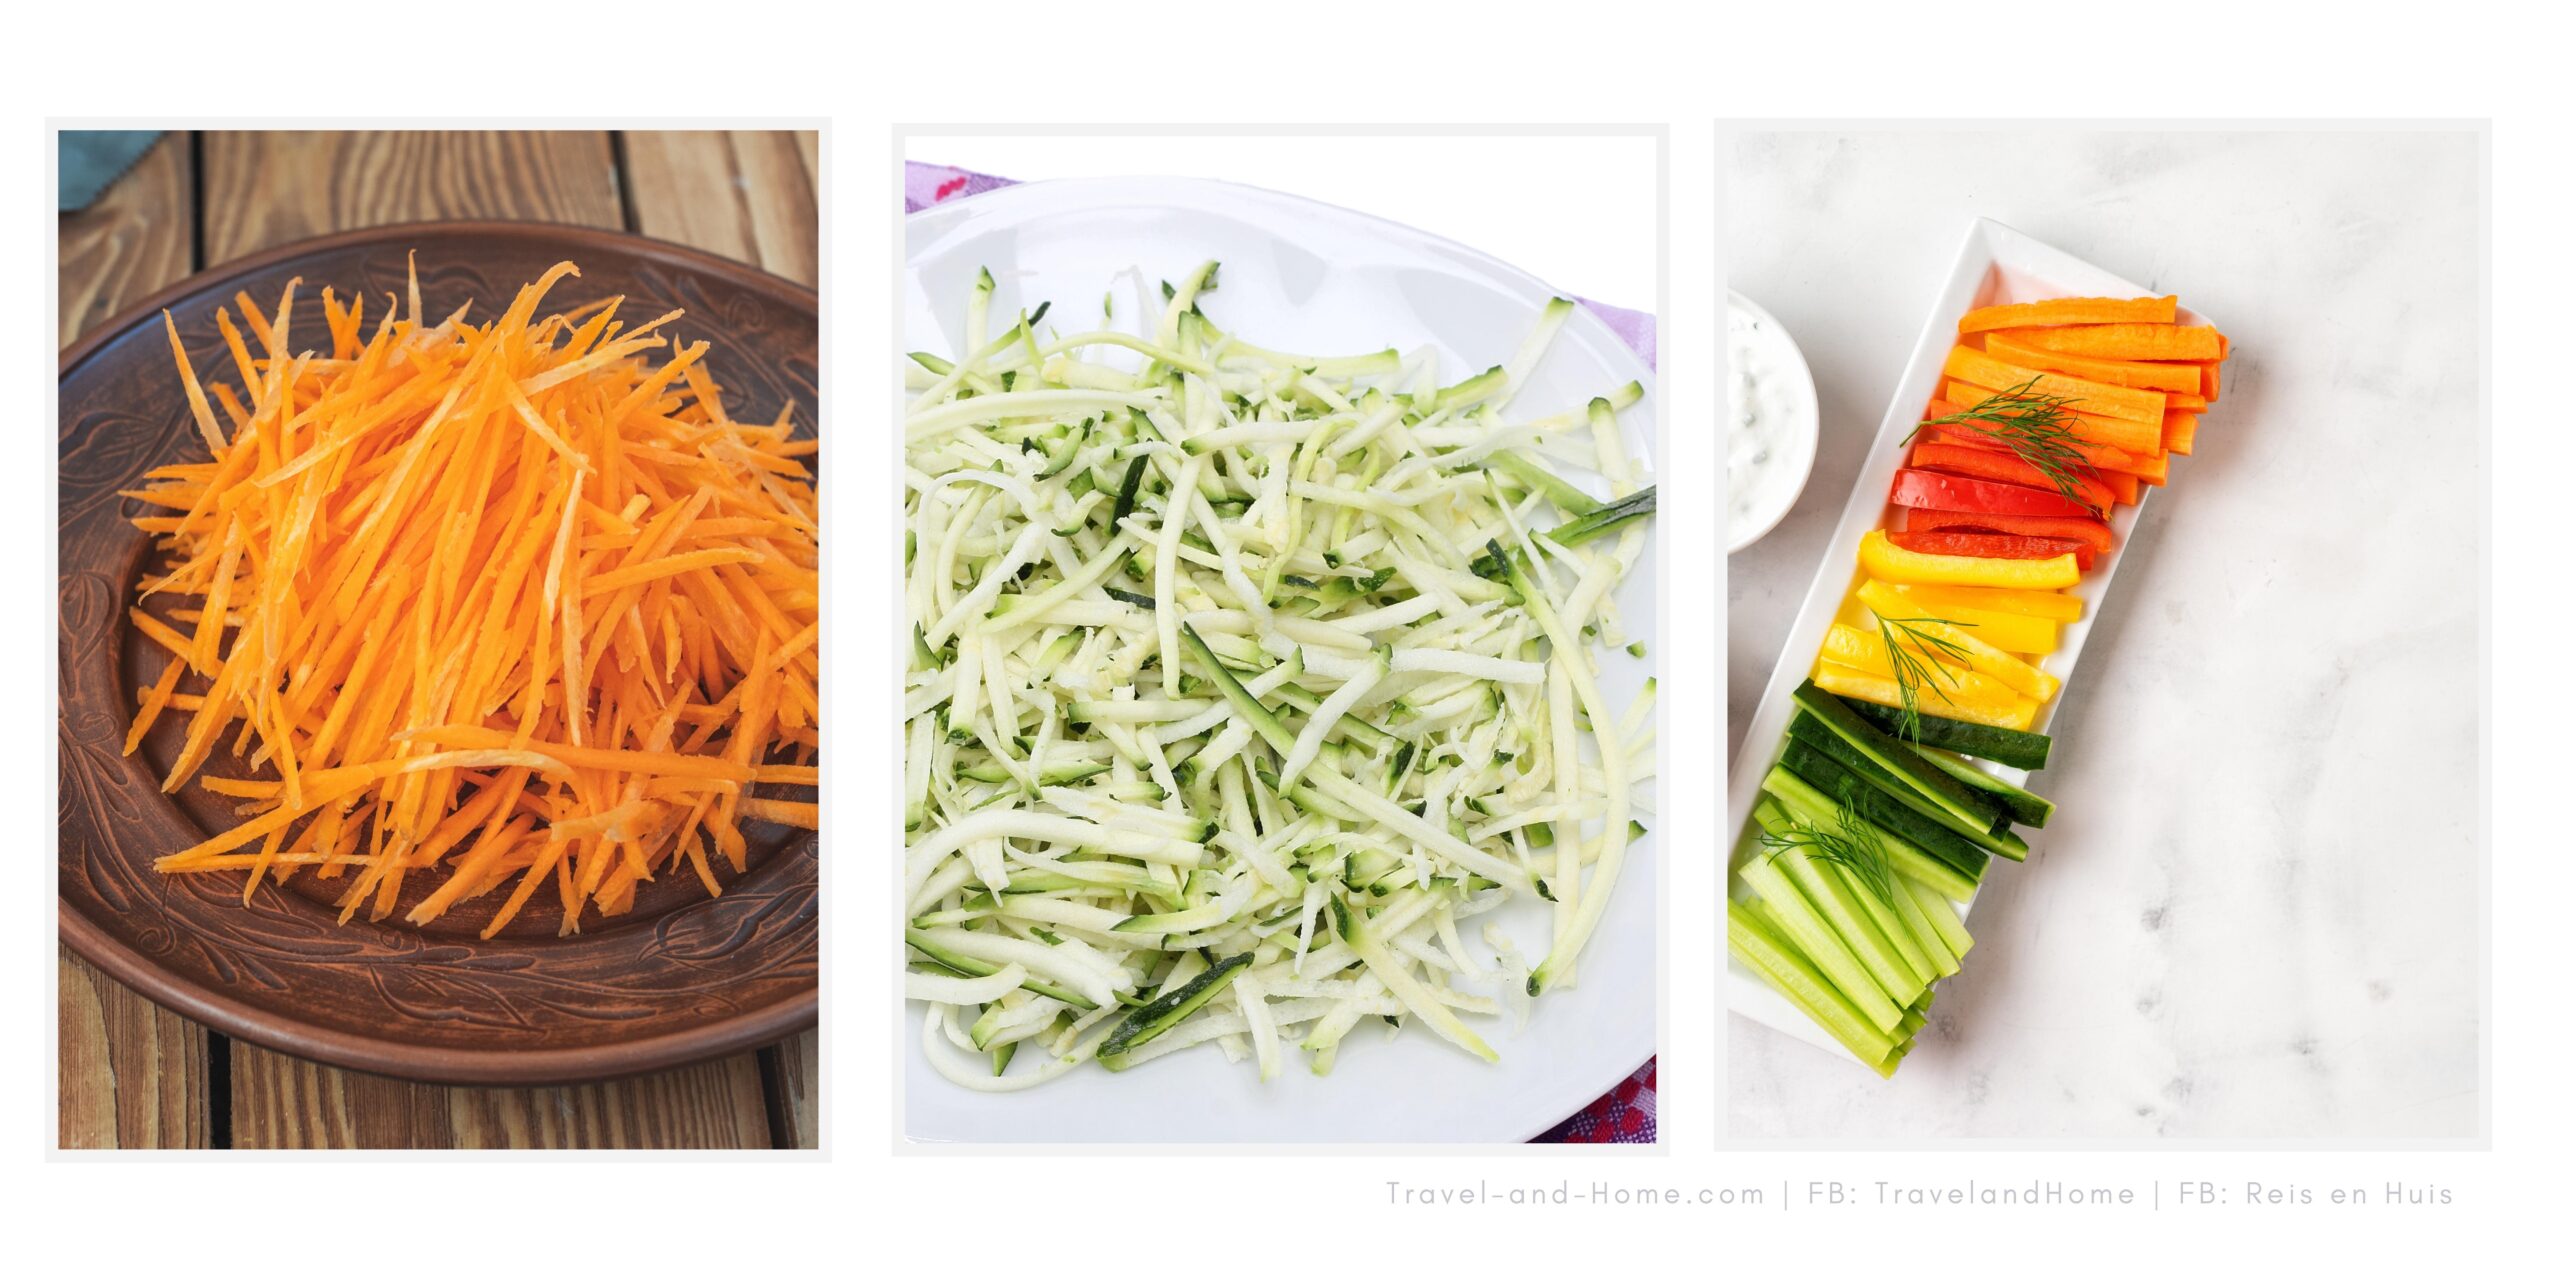 What does it mean to julienne vegetables